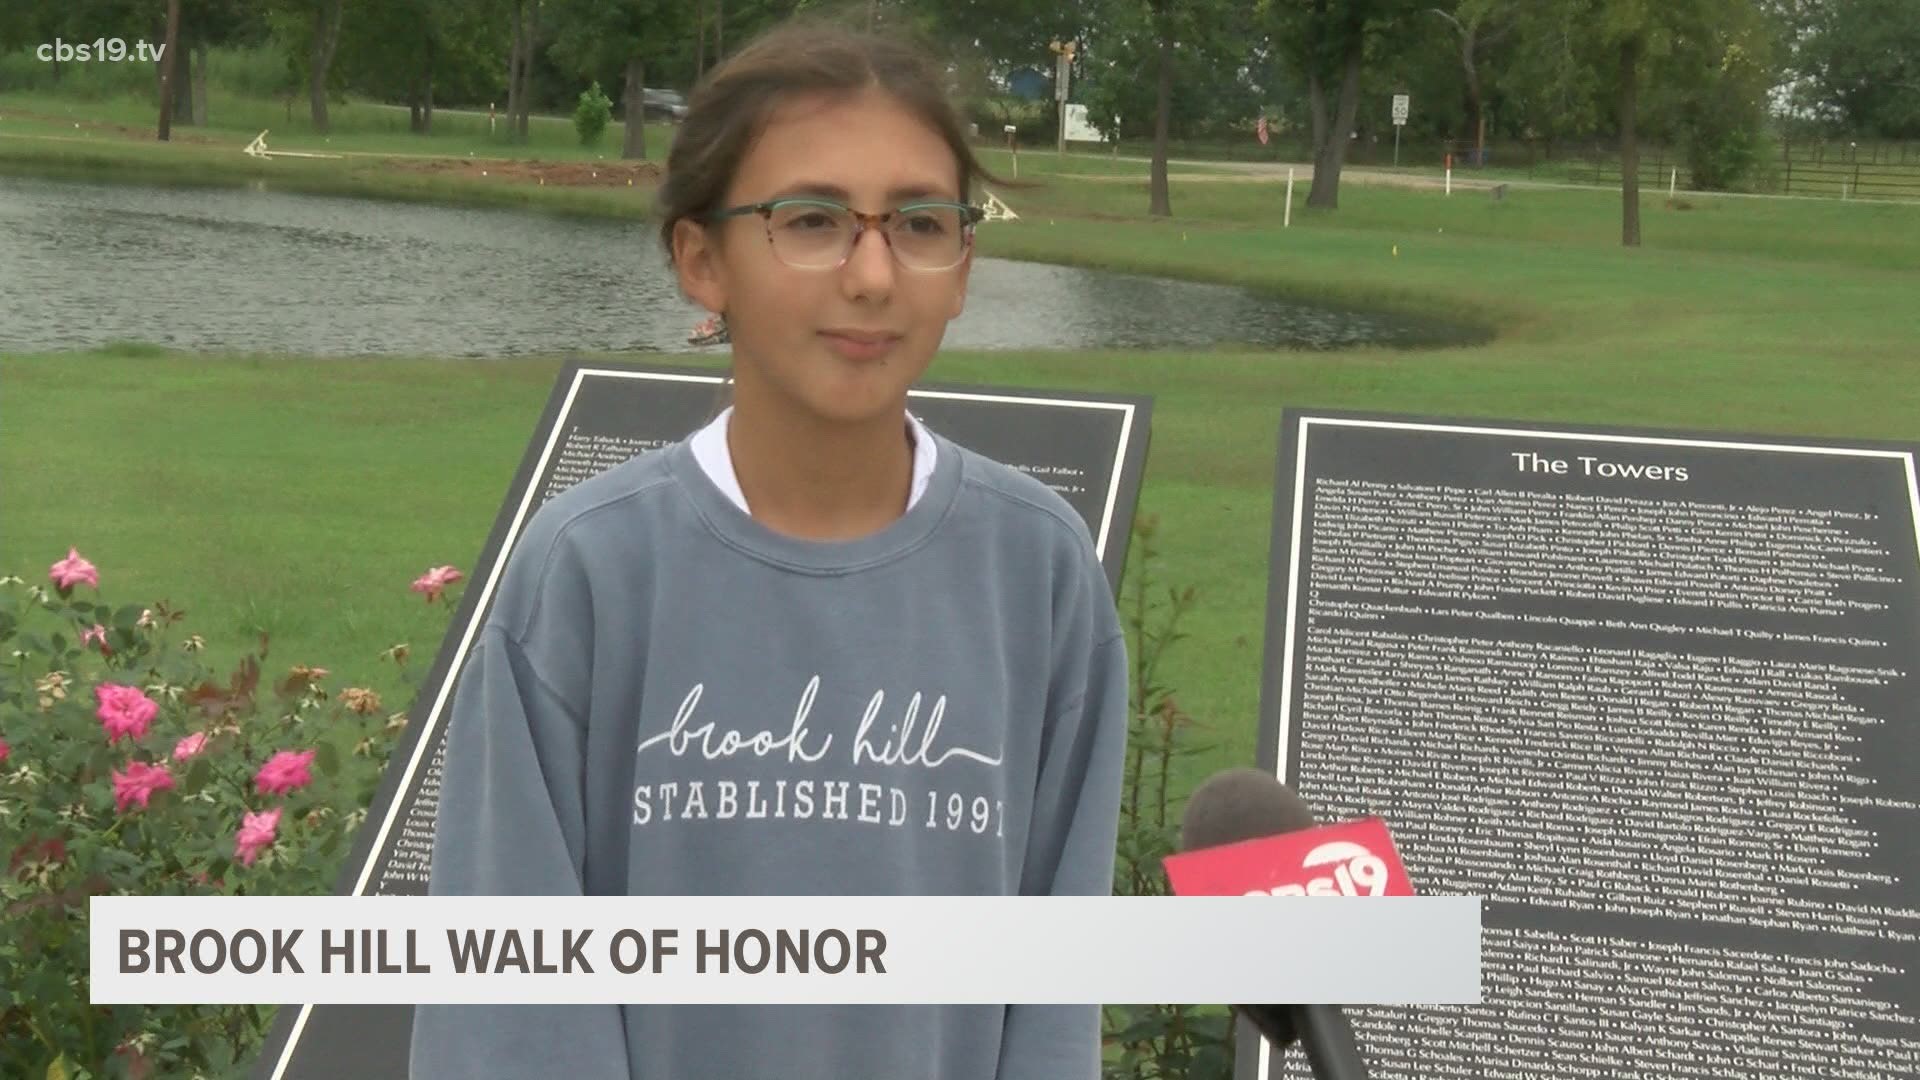 The Walk of Honor has 36 panels in a park-like setting paying tribute to defining moments of conflict in the 20th and 21st century.